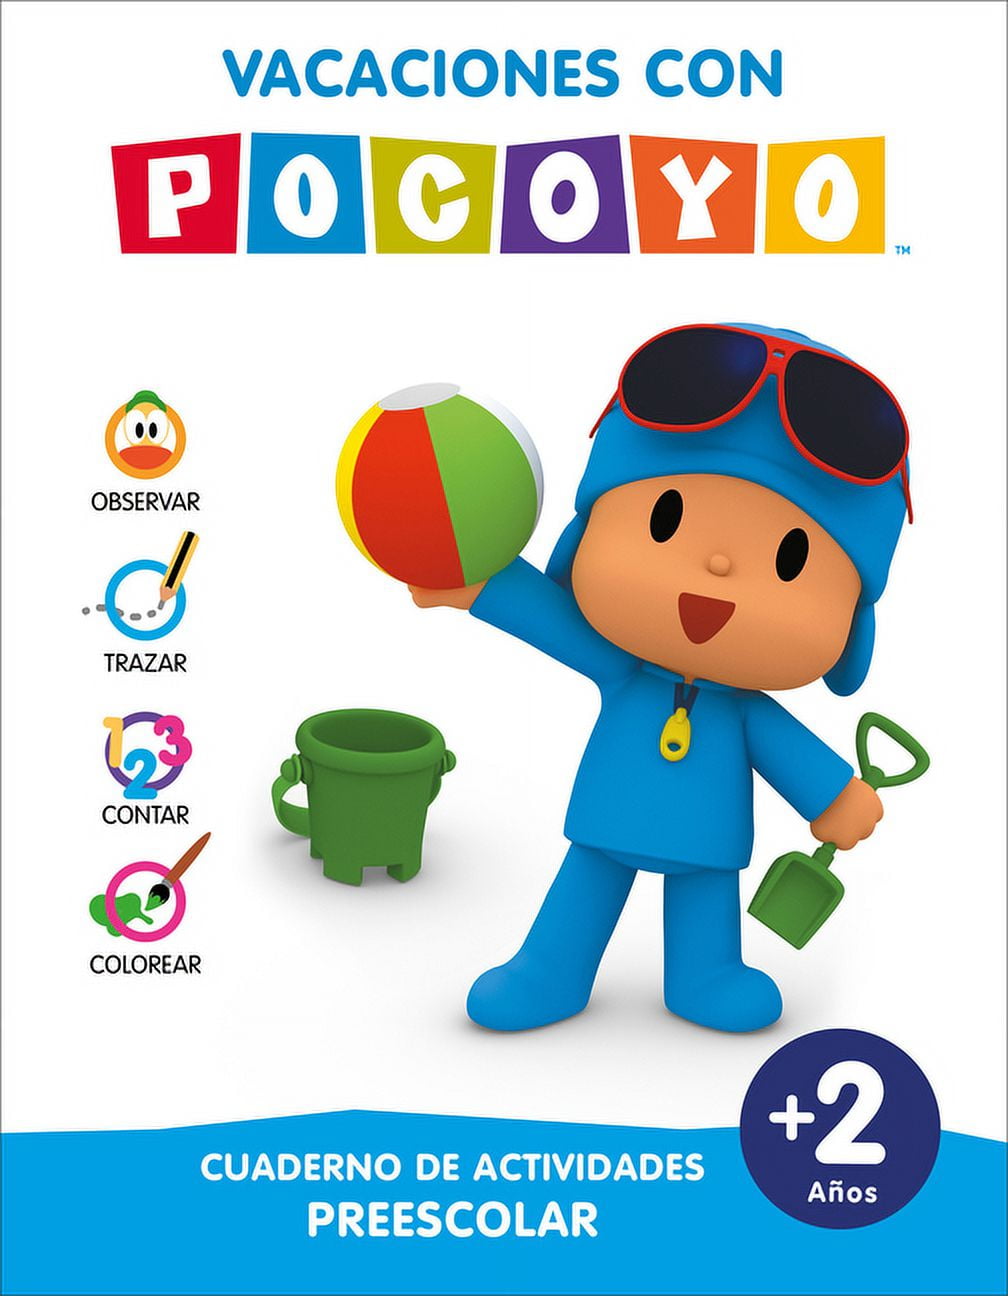 PHONICS IN SPANISH - Un cuento para cada letra c, q, g/gu, r-suave-, b, v,  z, ce /ci / I Read with Pocoyo. One Story for Each Letter 3) (Paperback) 